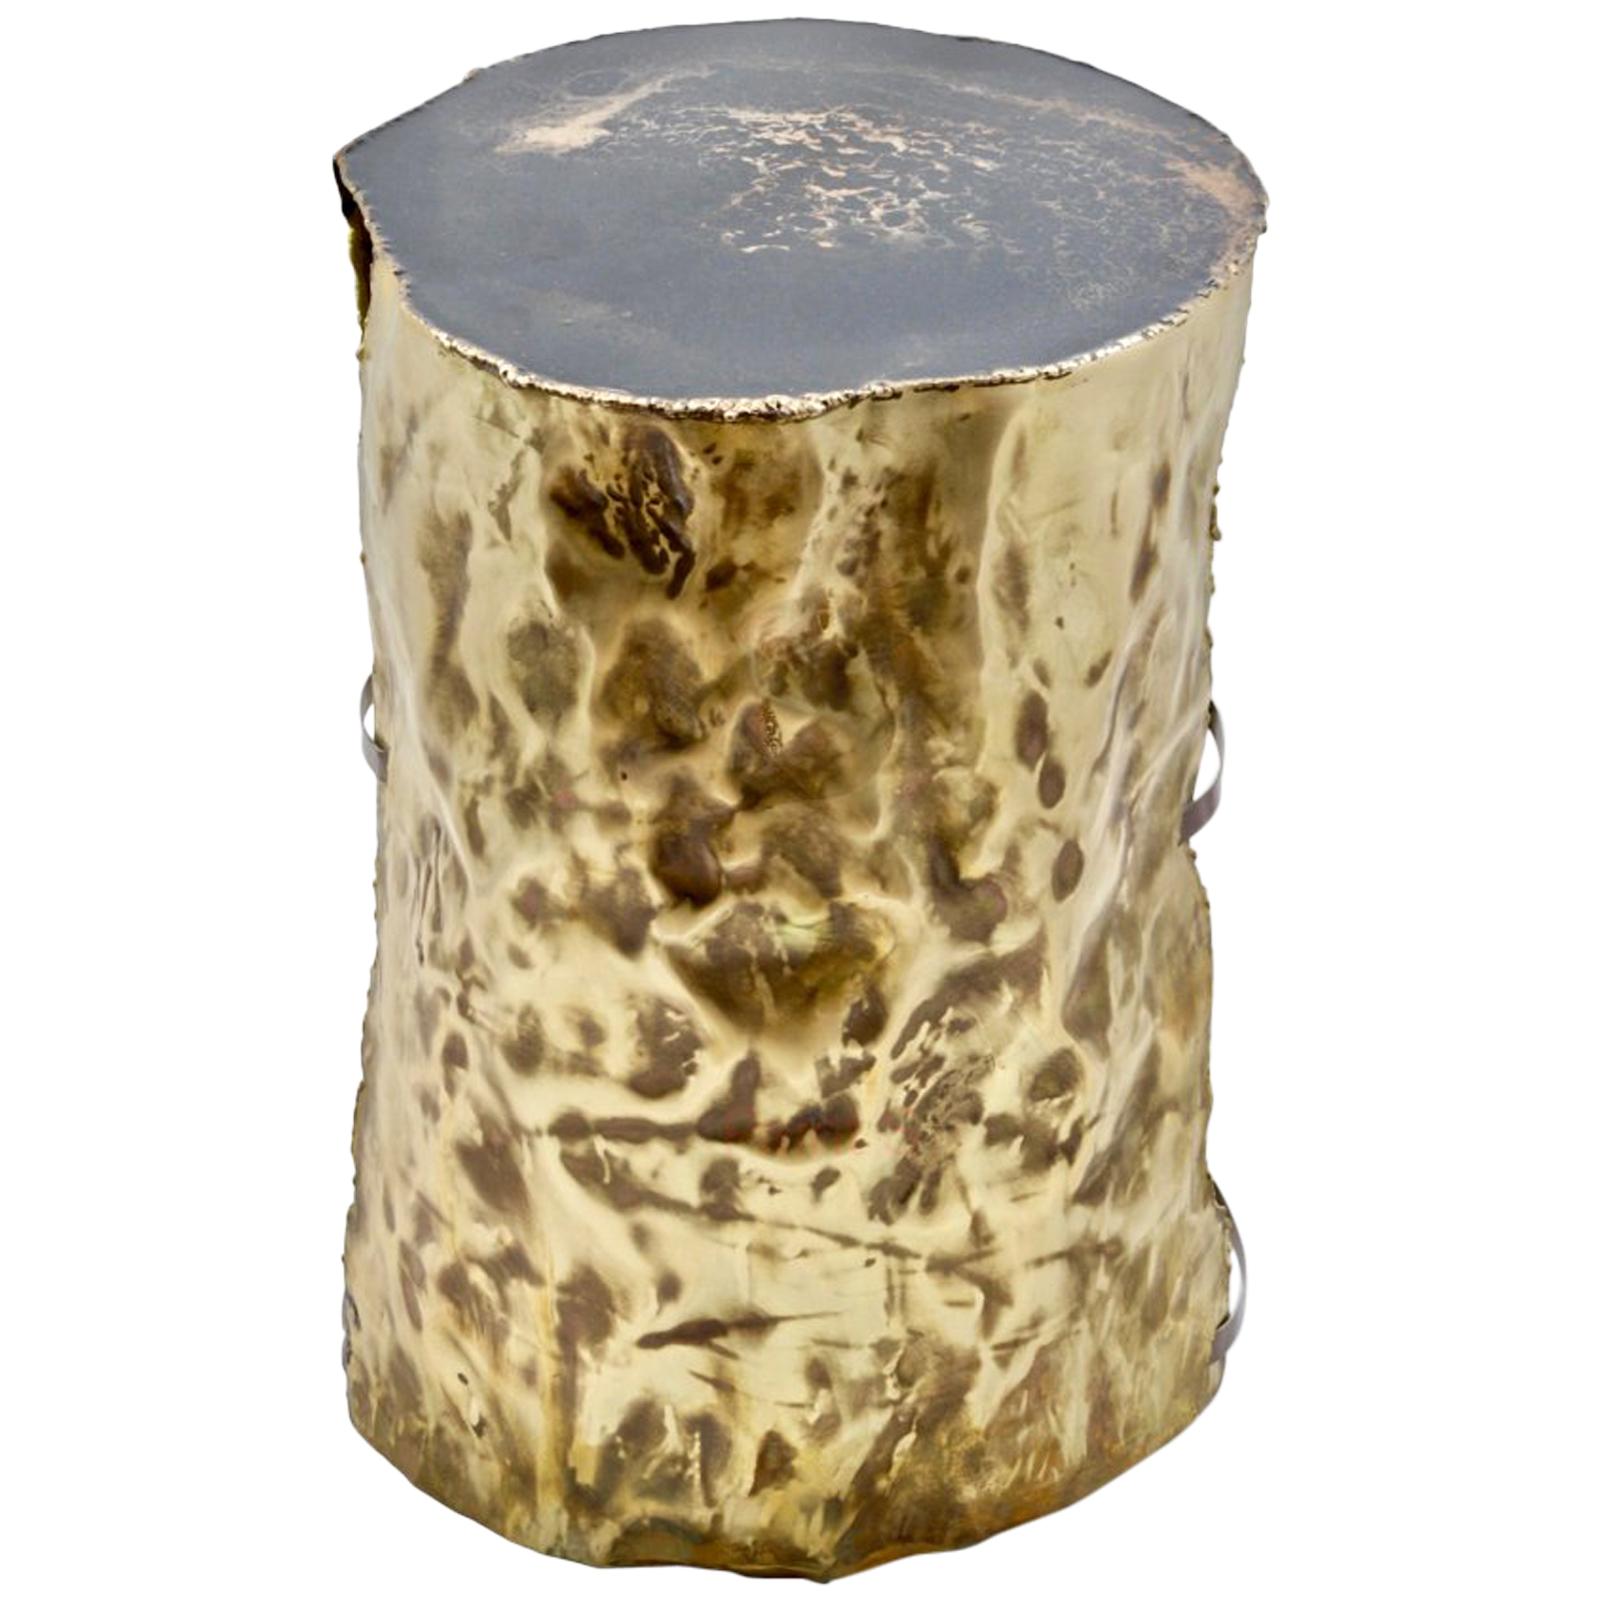 Dal Furlo "Metal tree" Side Table in Hammered Brass and Resin For Sale